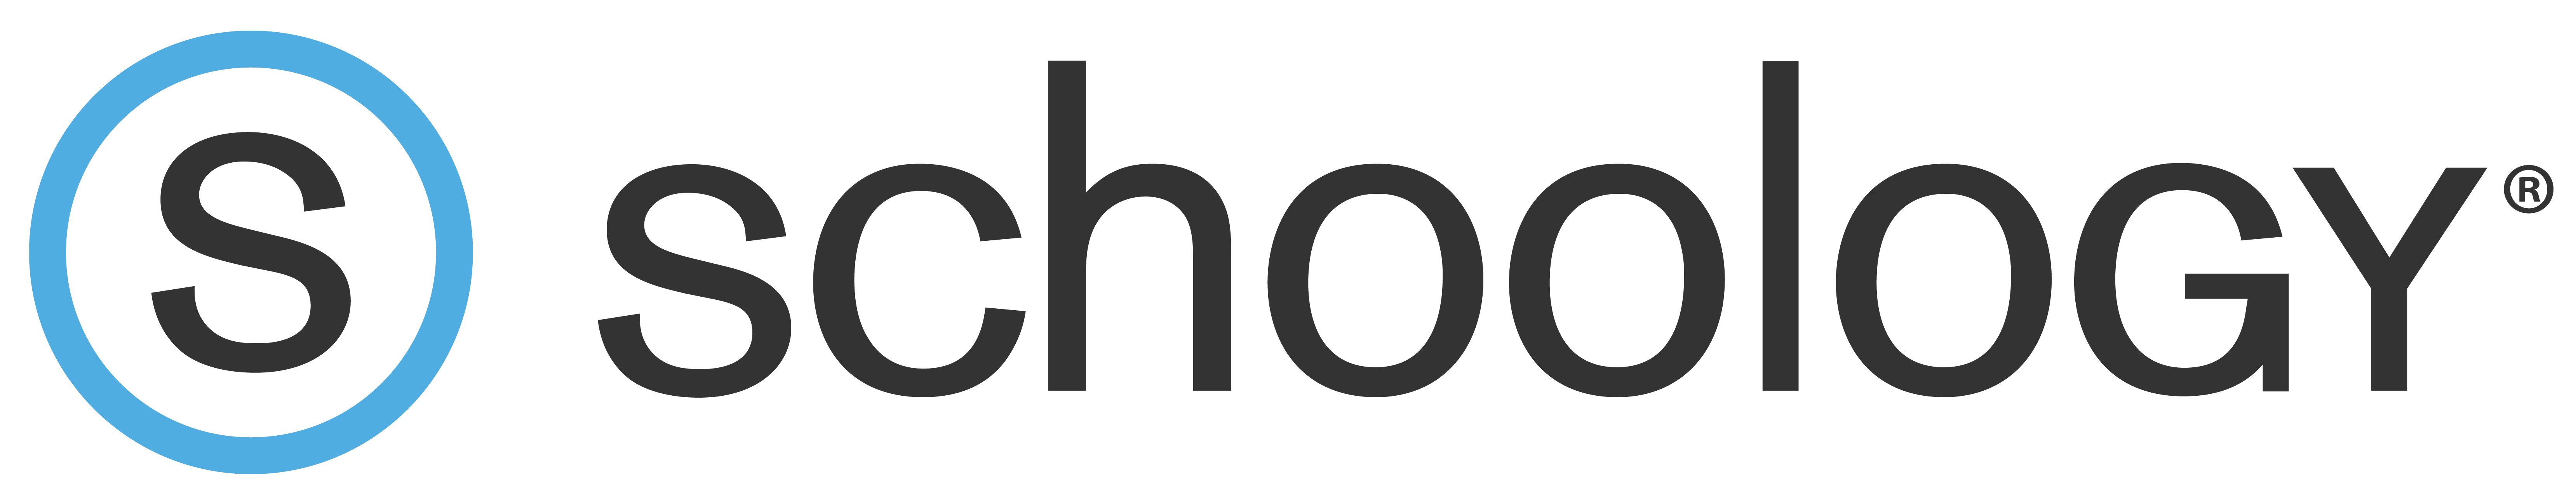 Schoology Logo - Getting Started on Schoology - For Instructors – Schoology Support